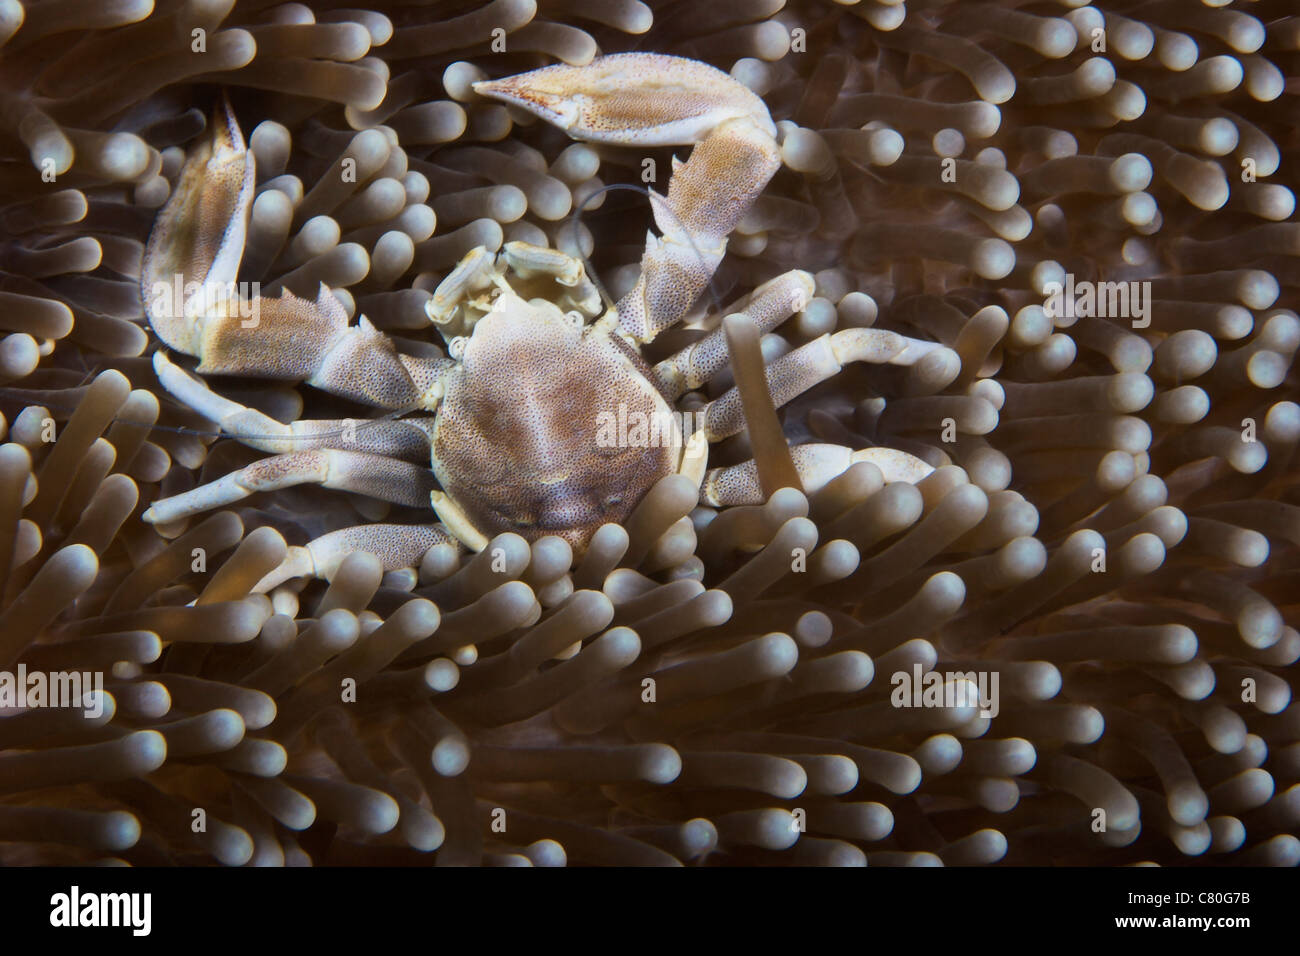 Porcelain Crab on its anemone, Papua New Guinea. Stock Photo